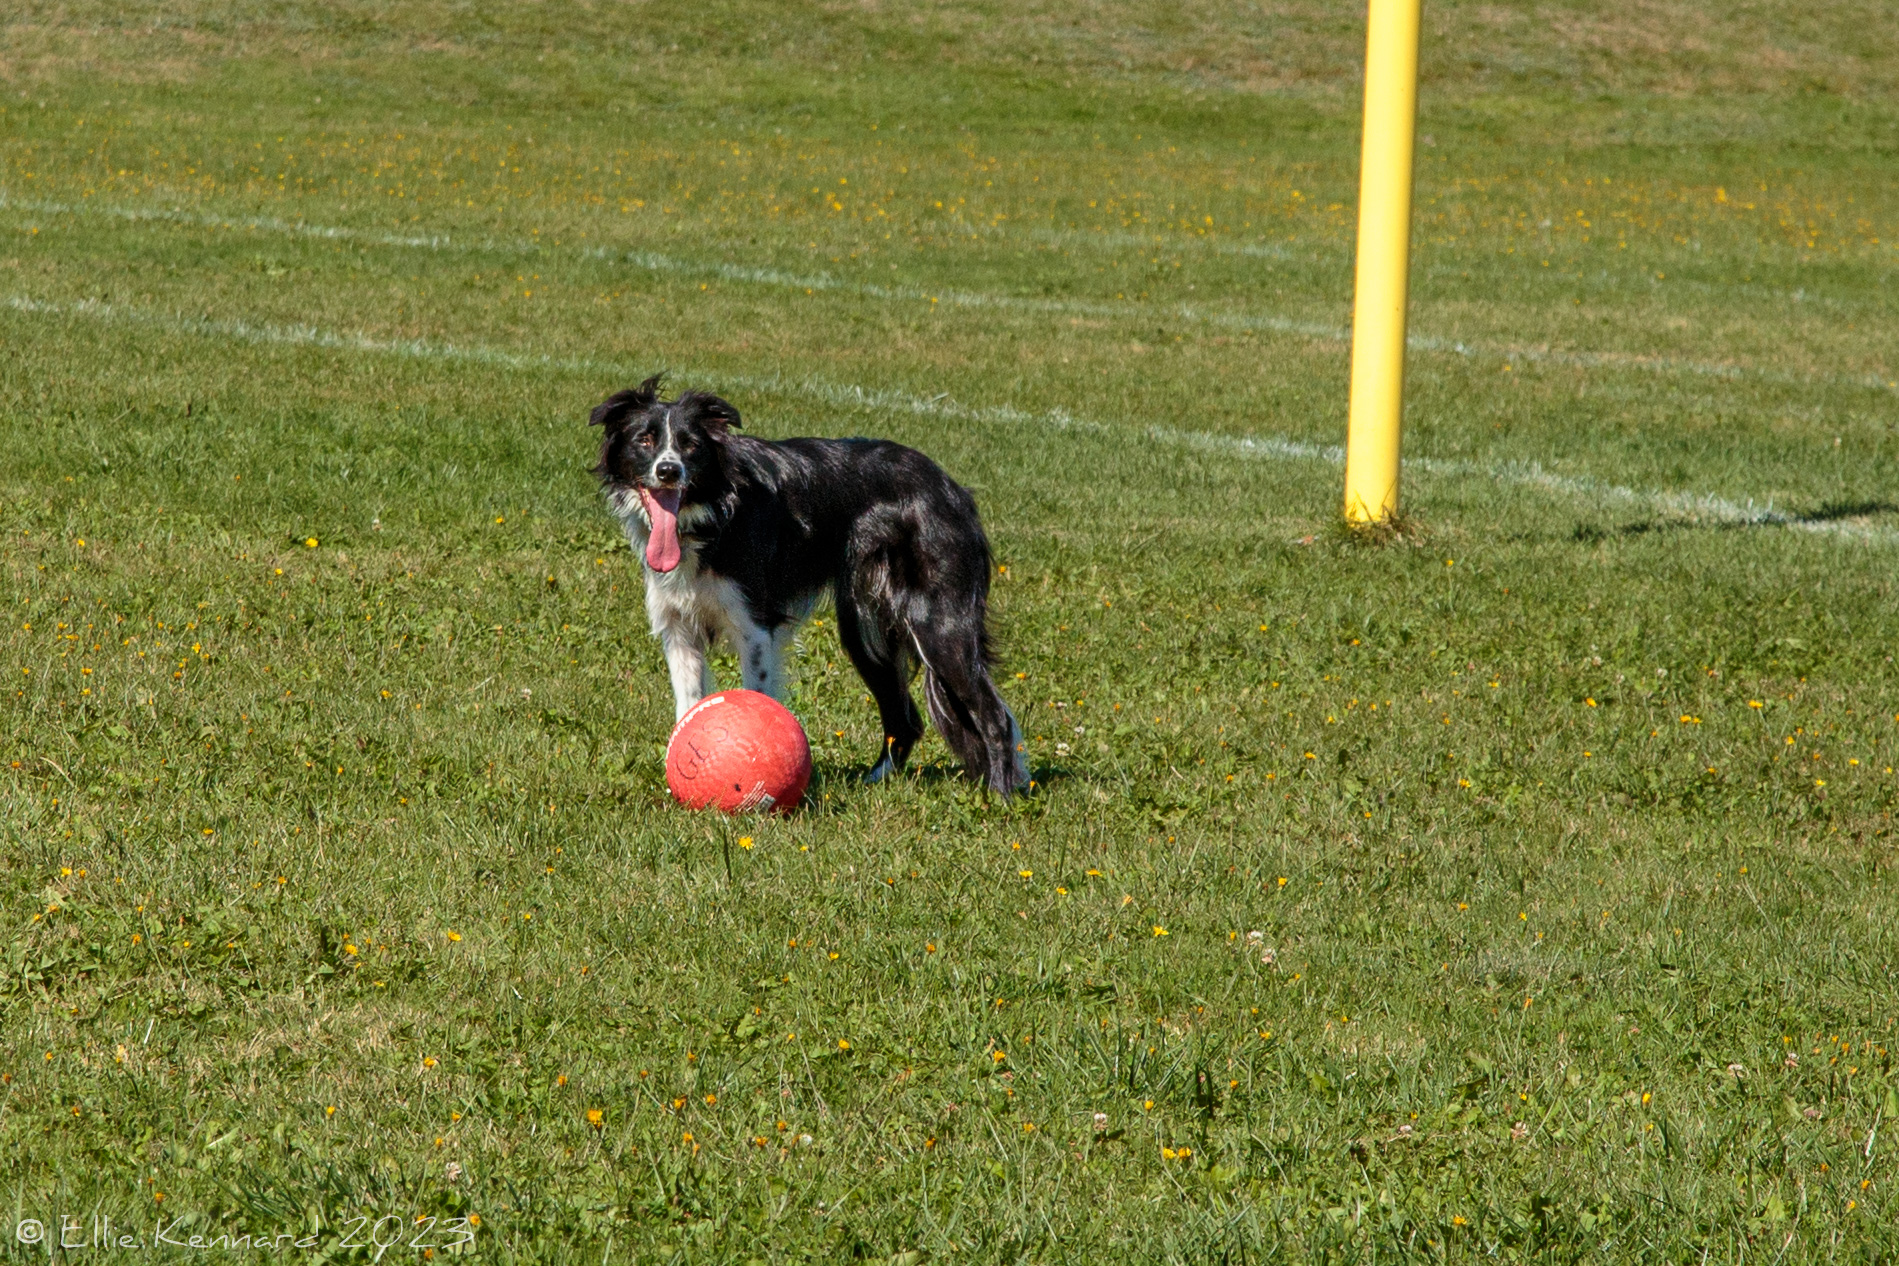 A young black and white border collie is standing on the green grass of a football (or soccer) pitch in front of a goal post. Her tongue is hanging way out and her black ears are half raised. She has a big red ball in front of her on the grass.